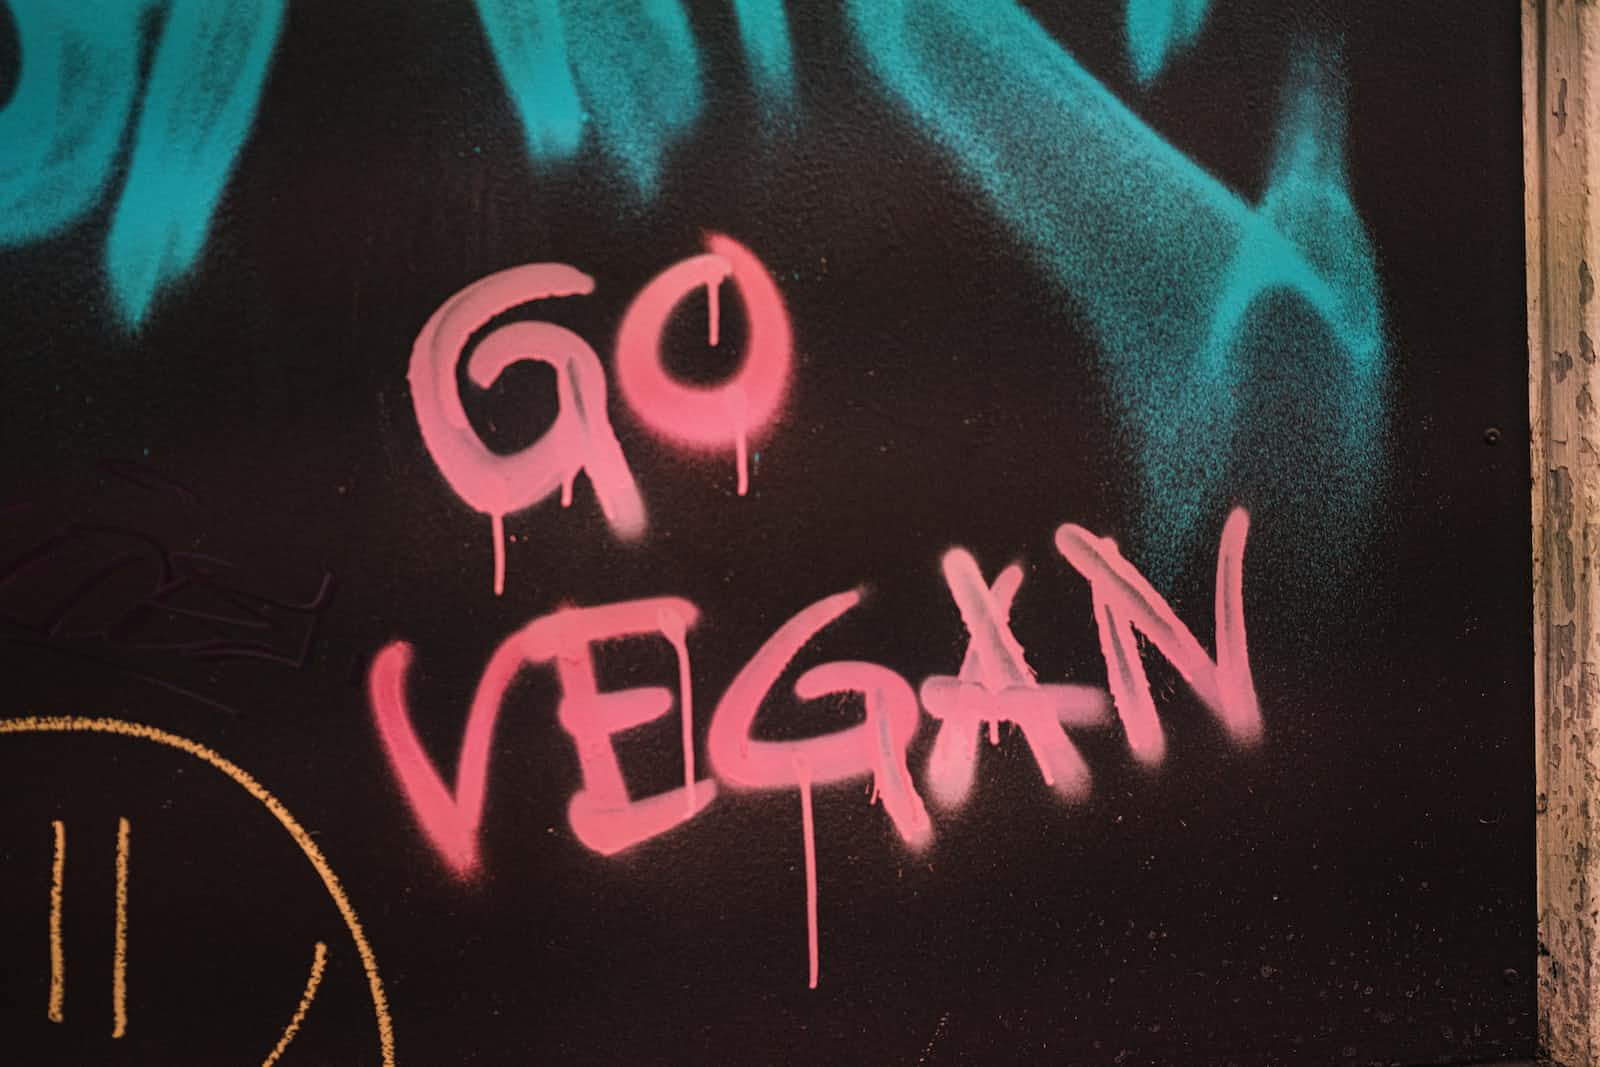 How the Vegan trademark revolutionised product labelling